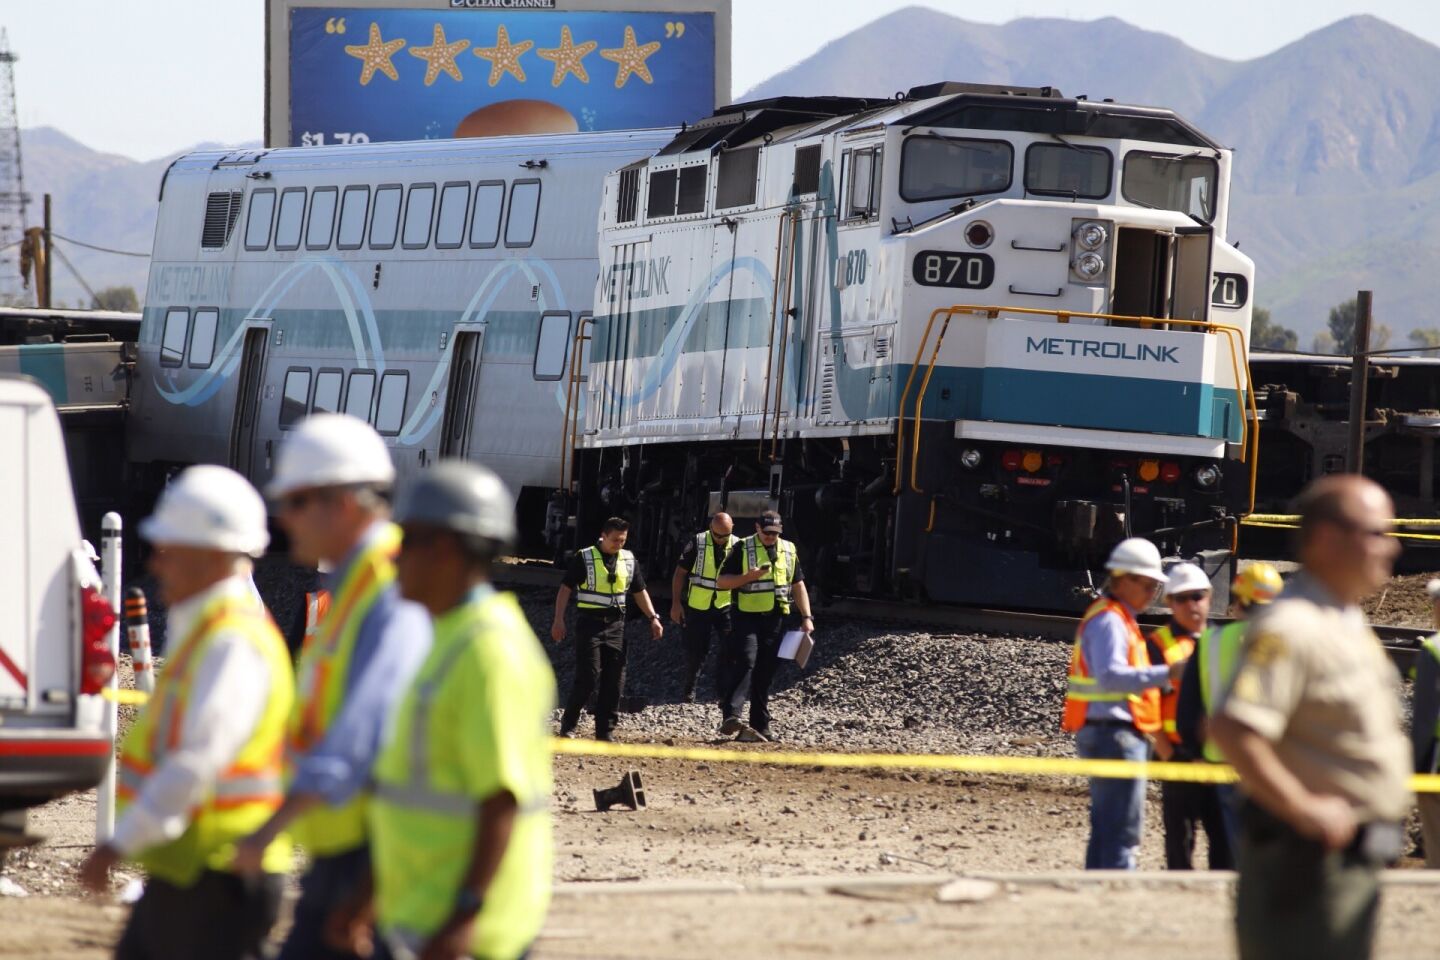 Ventura County first responders at the scene of an overturned Metrolink train car in Oxnard Tuesday, after it collided with a vehicle on the tracks.